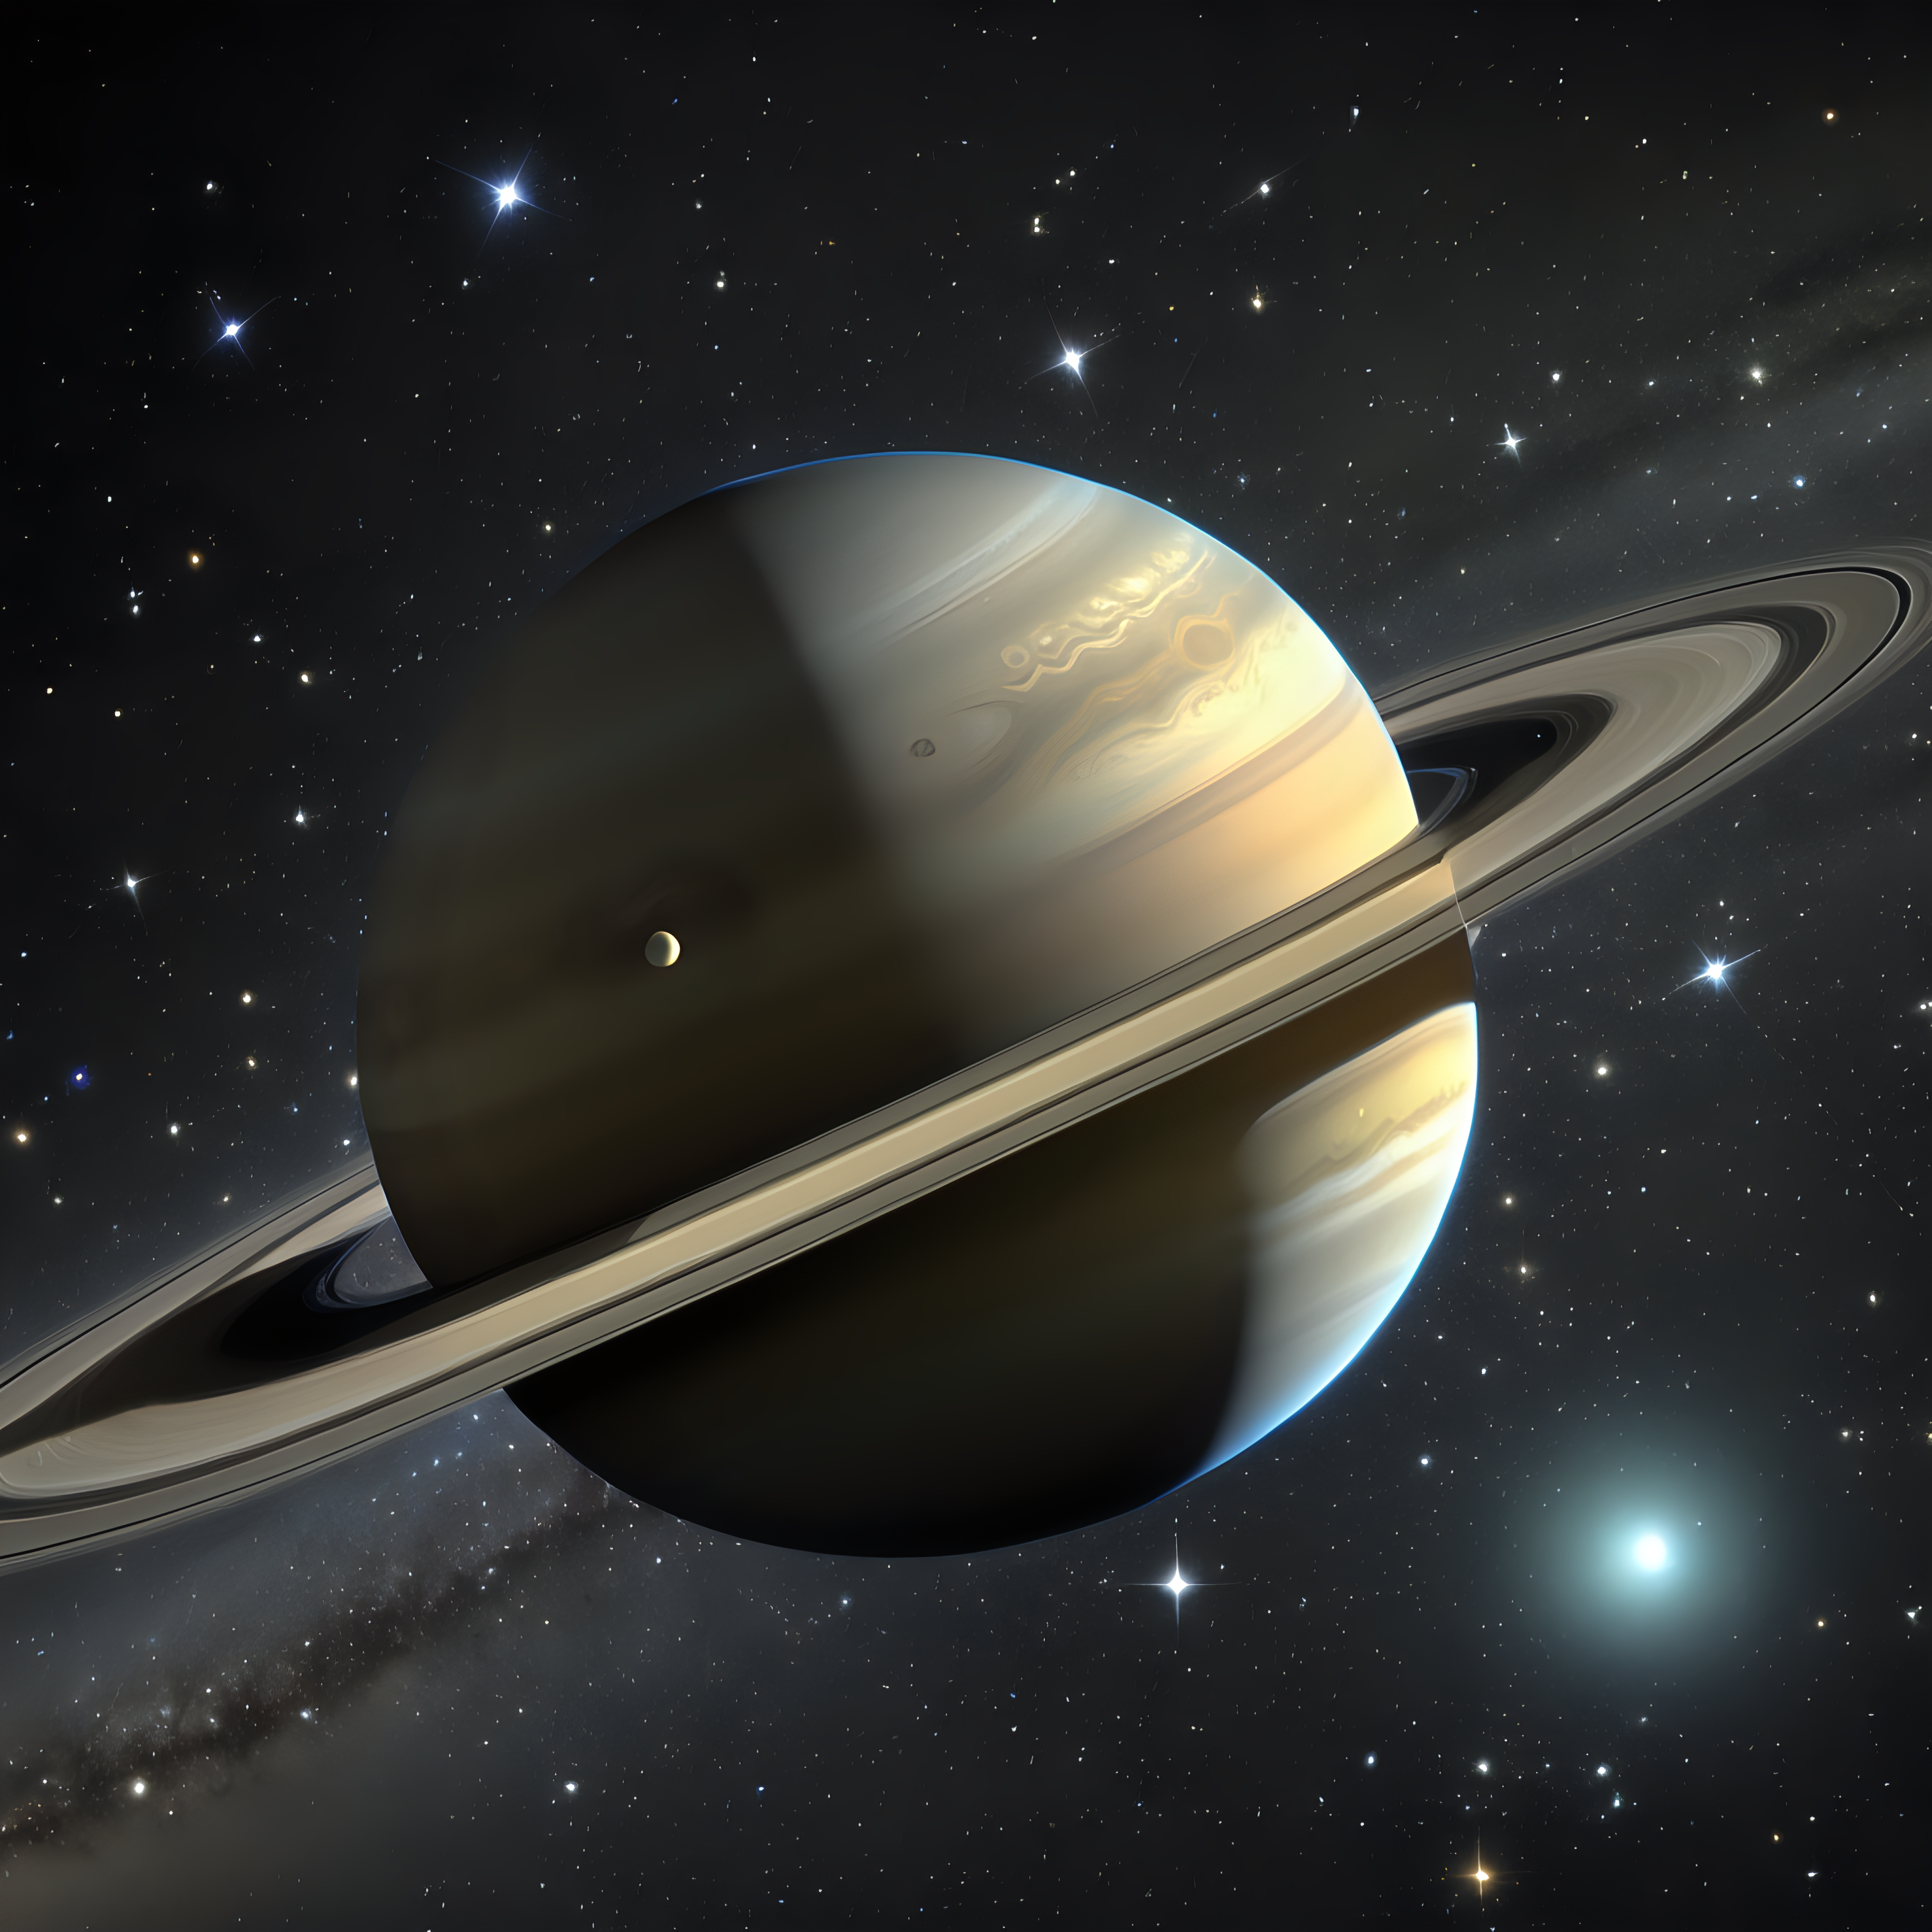 The planet Saturn surrounded by stars